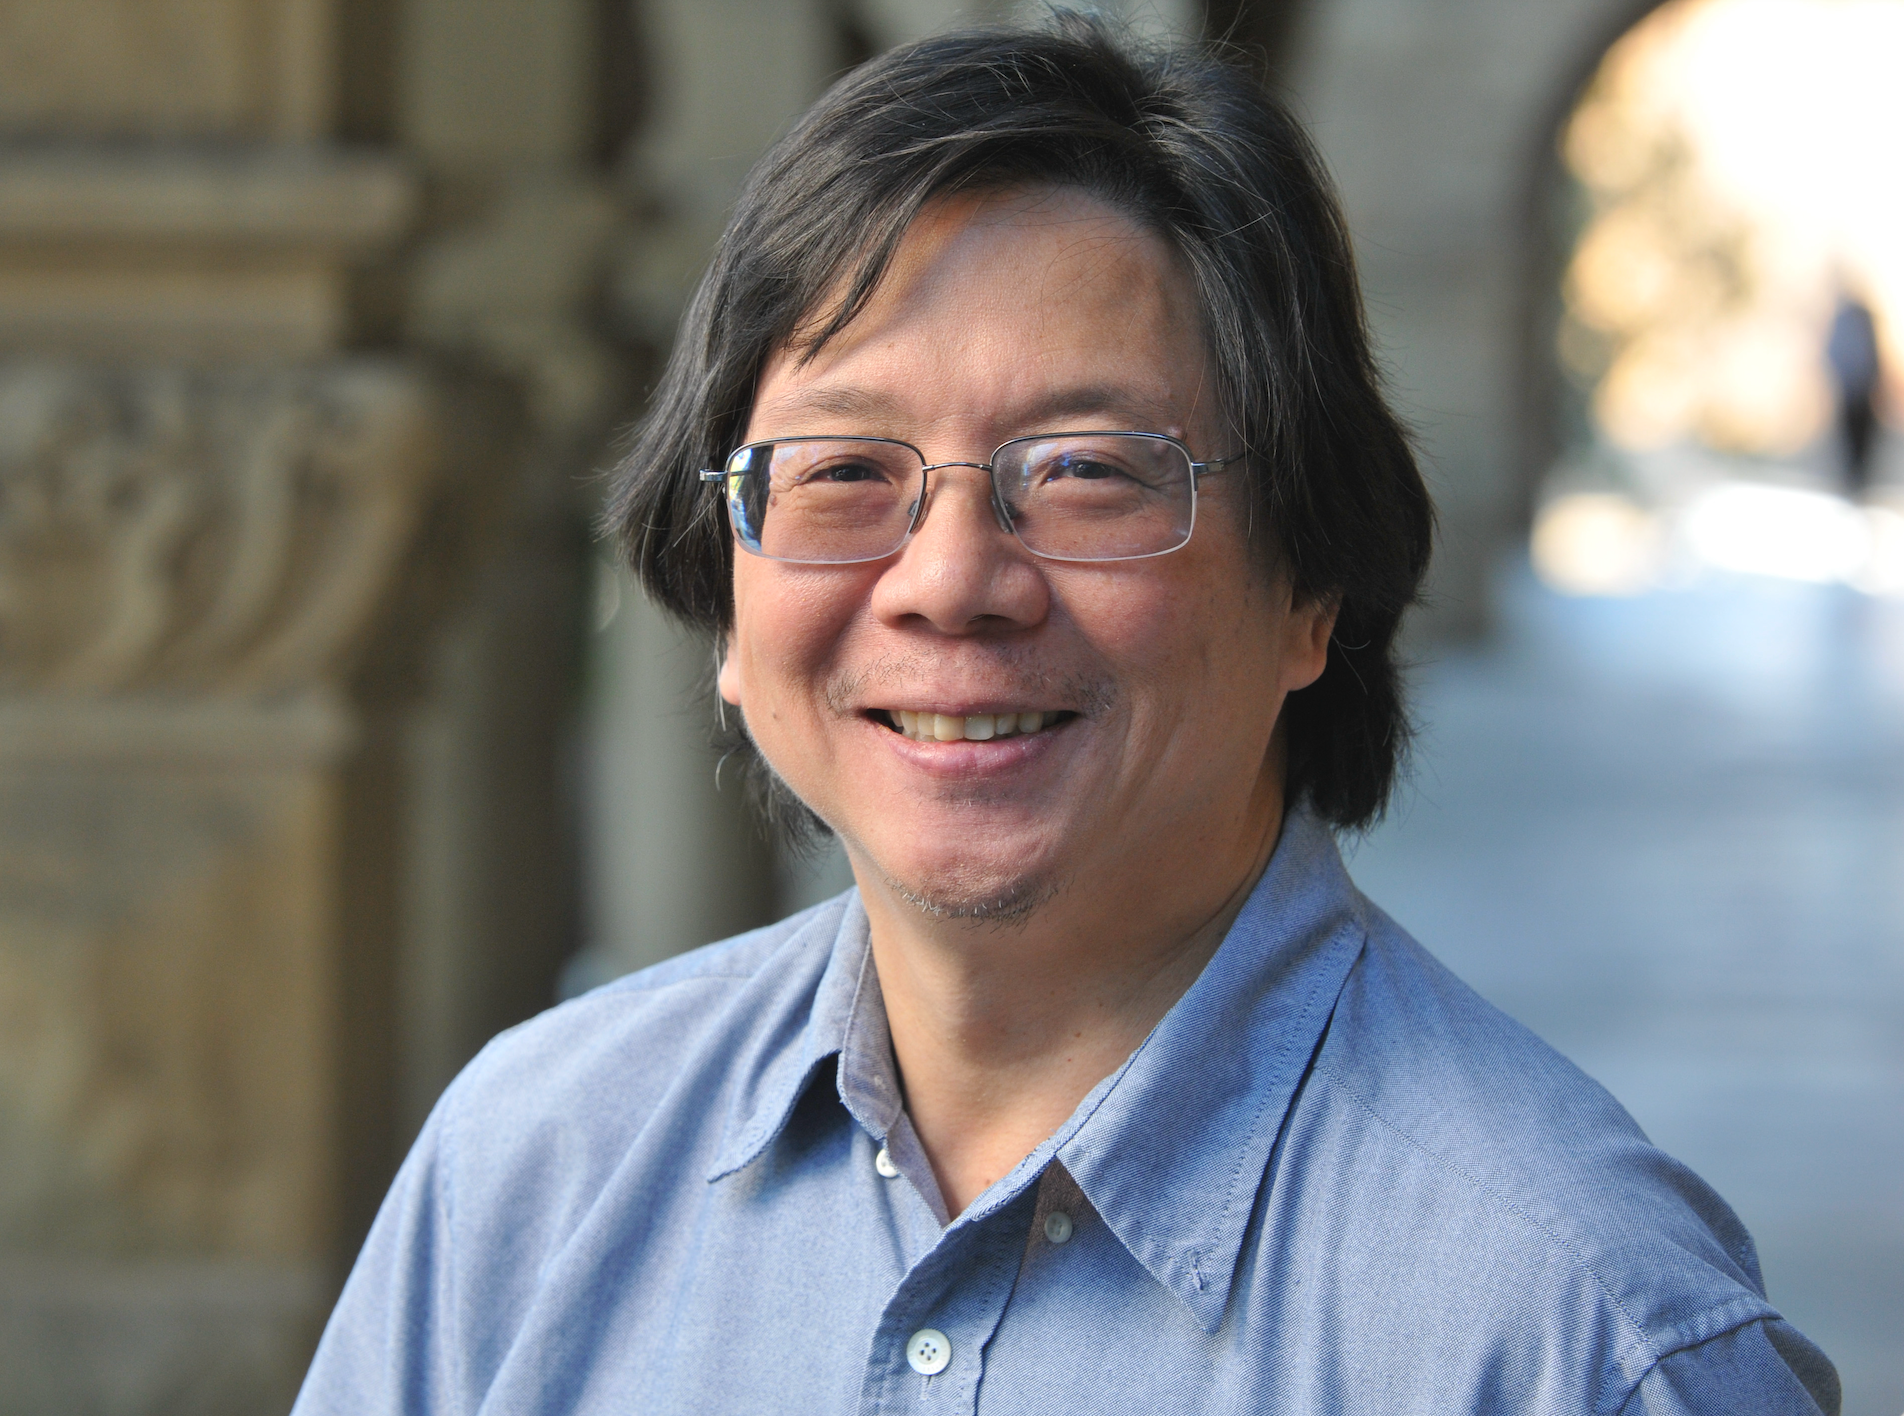 Dr. Herb Lin, senior research scholar for cyber policy and security at the Center for International Security and Cooperation and Hank J. Holland Fellow in Cyber Policy and Security at the Hoover Institution at Stanford University.